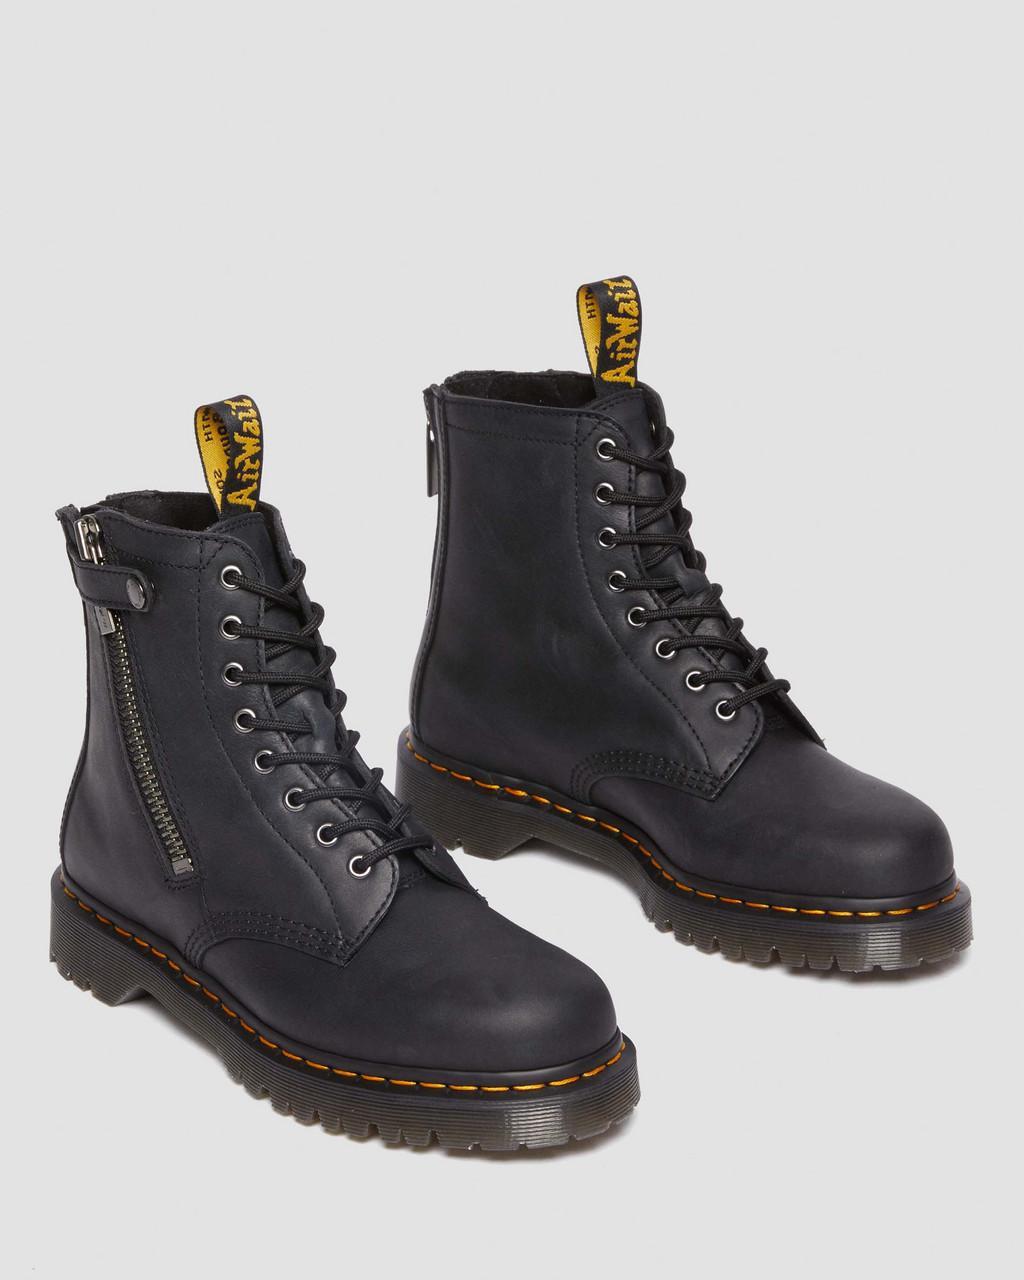 Dr. Martens 1460 Alternative Full Grain Leather Lace Up Boots in Black |  Lyst